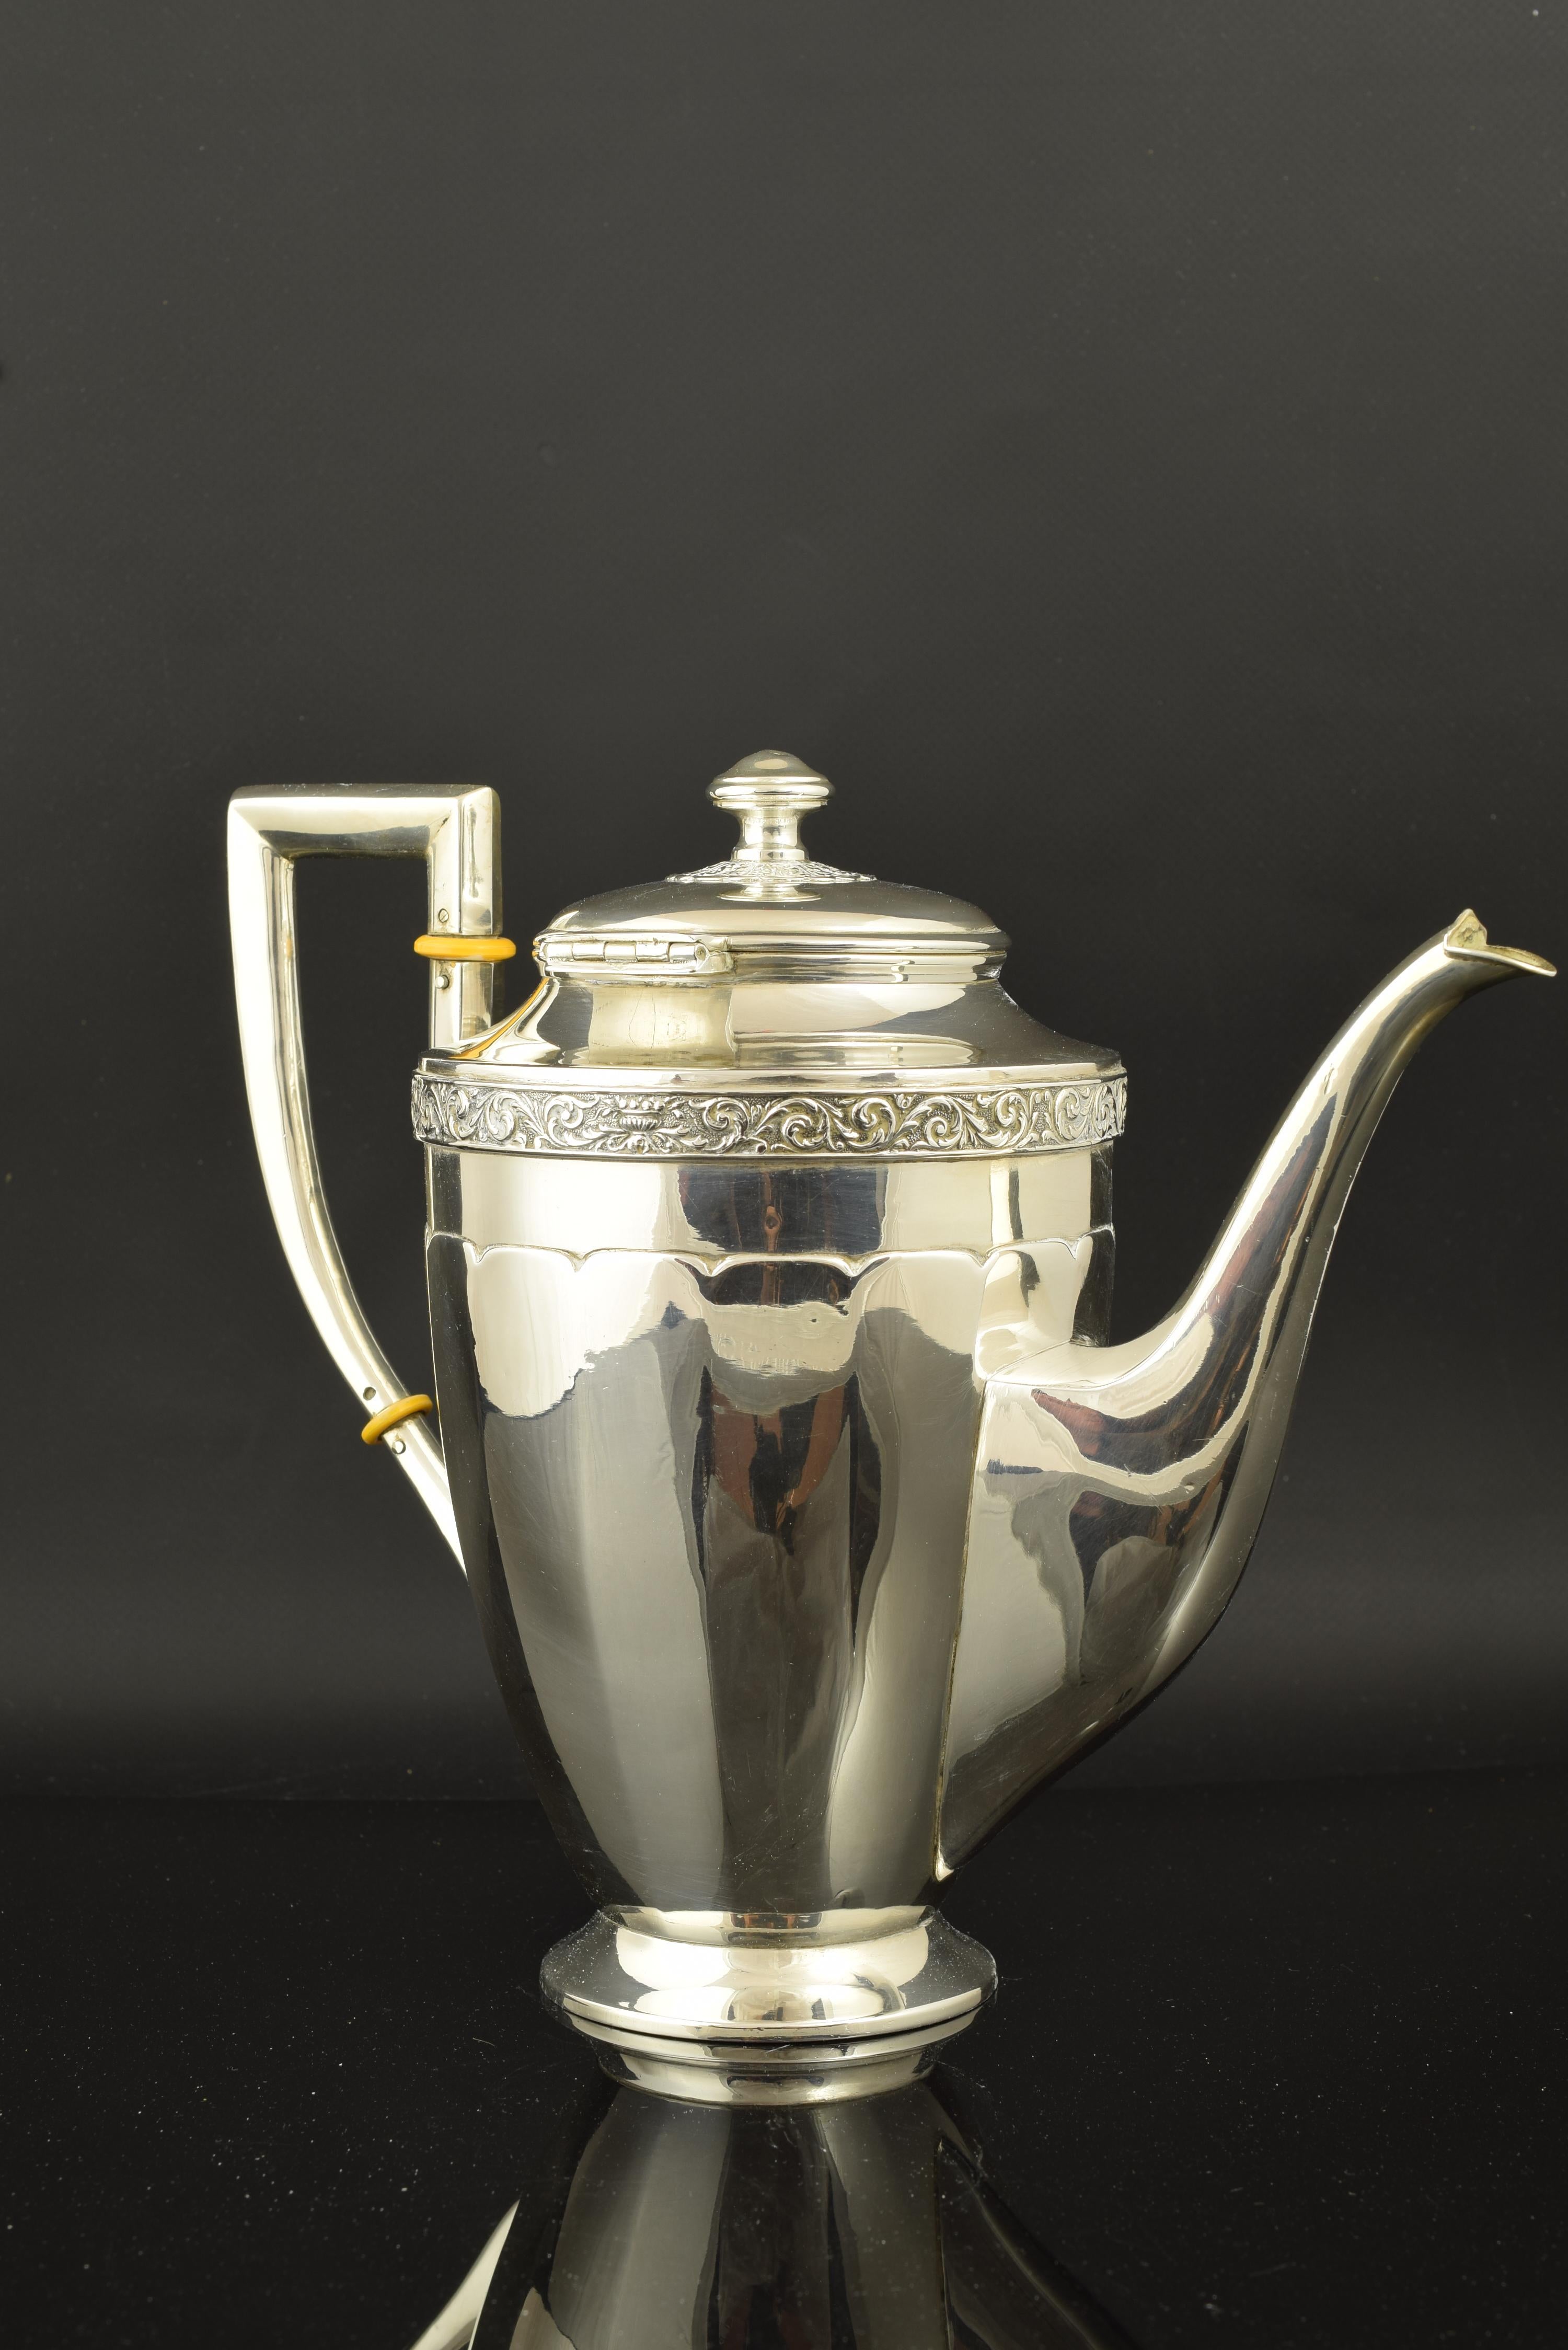 Teapot. Silver. Dionisio García, Madrid, towards the beginning of the 20th century. 
With contrast marks.
 Teapot with a circular base and a body decorated with an area that looks like very simplified gallons and a band on top of